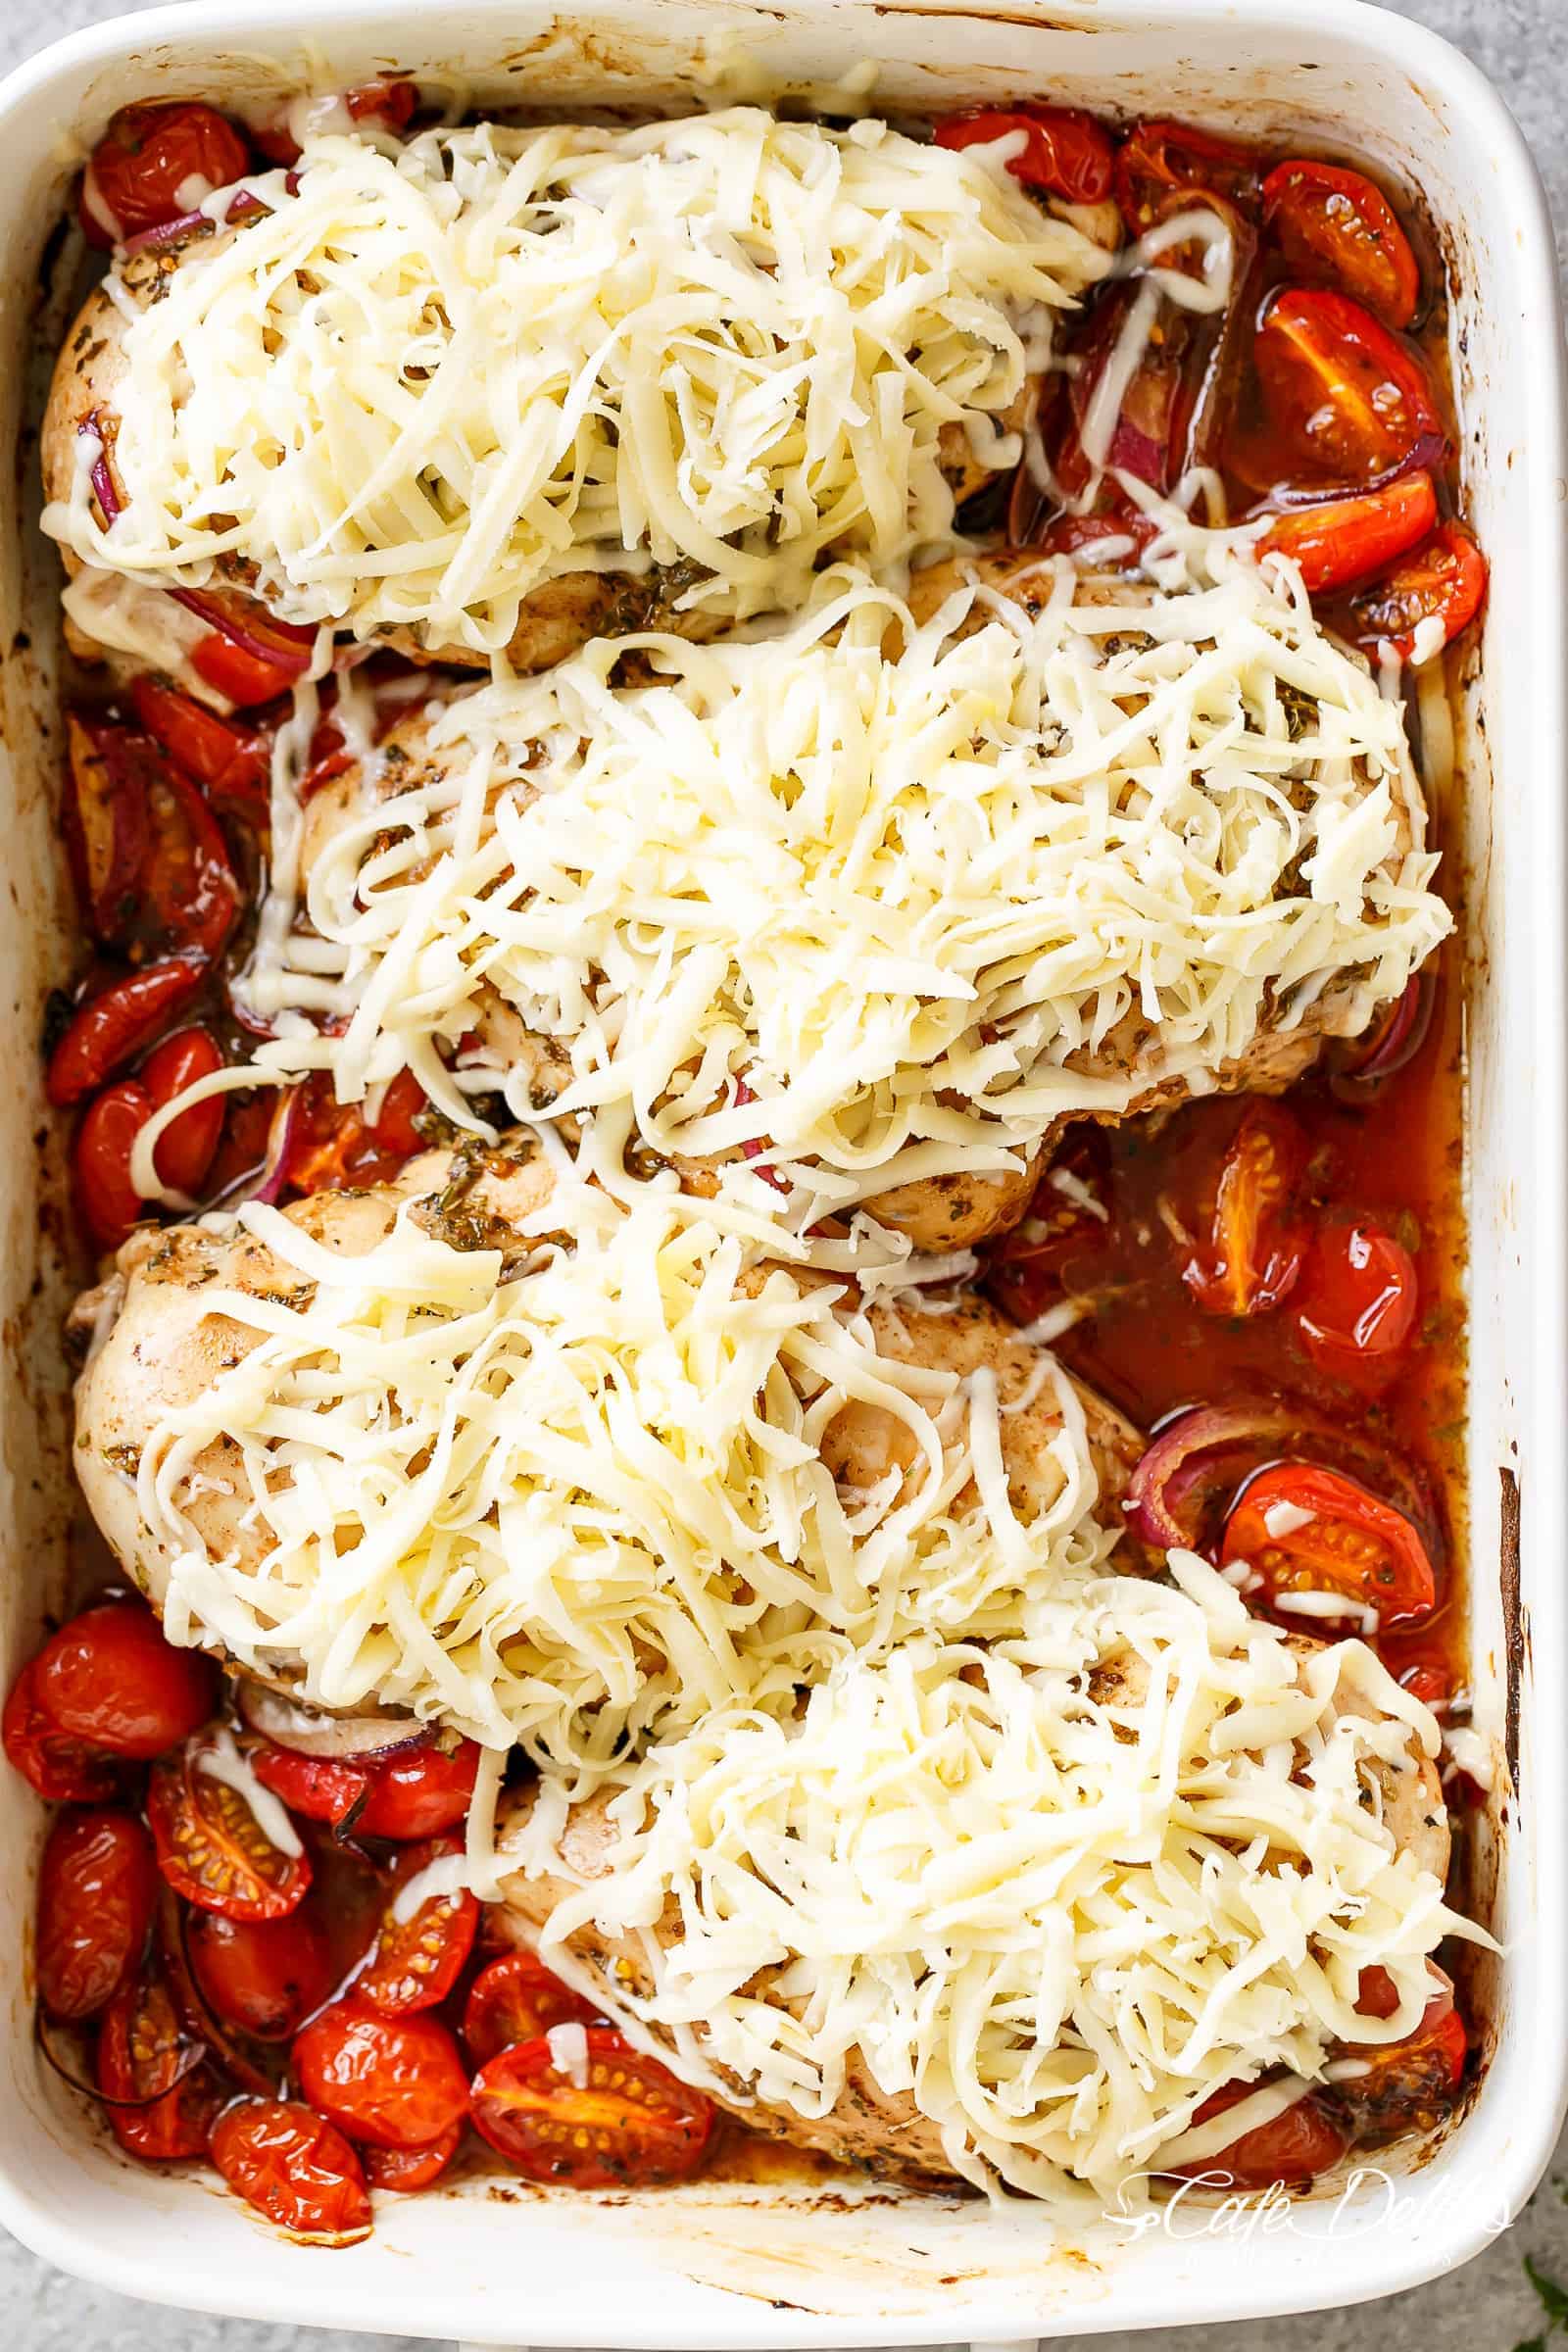 Balsamic Baked Chicken Breast rubbed with garlic and herbs, dripping with a tomato balsamic sauce and melted mozzarella cheese! EASY chicken recipe! | https://cafedelites.com